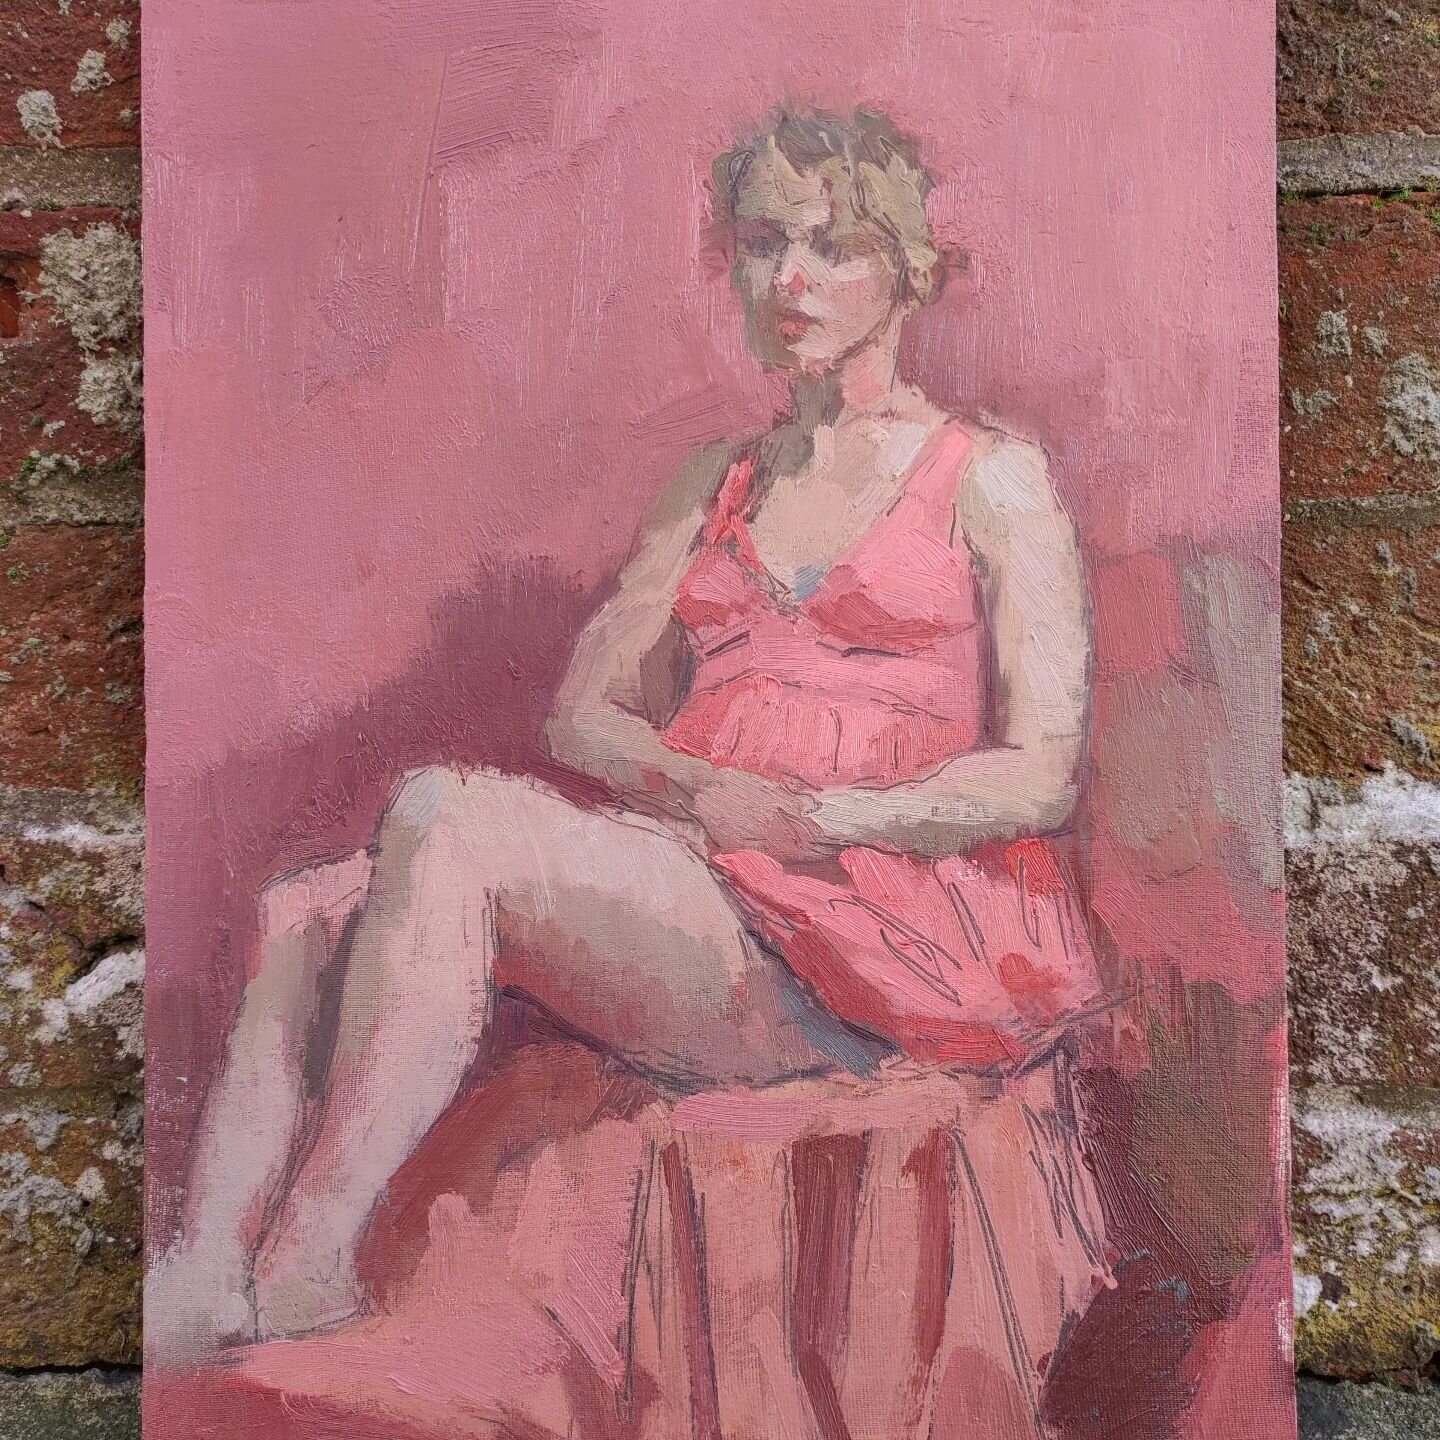 Eli in a pink dress. 28.01.2023

Painting with @hbrittaine - excellent set design Harri - @katiemaeveart and others

#oilpainting#pinkdress#oilportrait